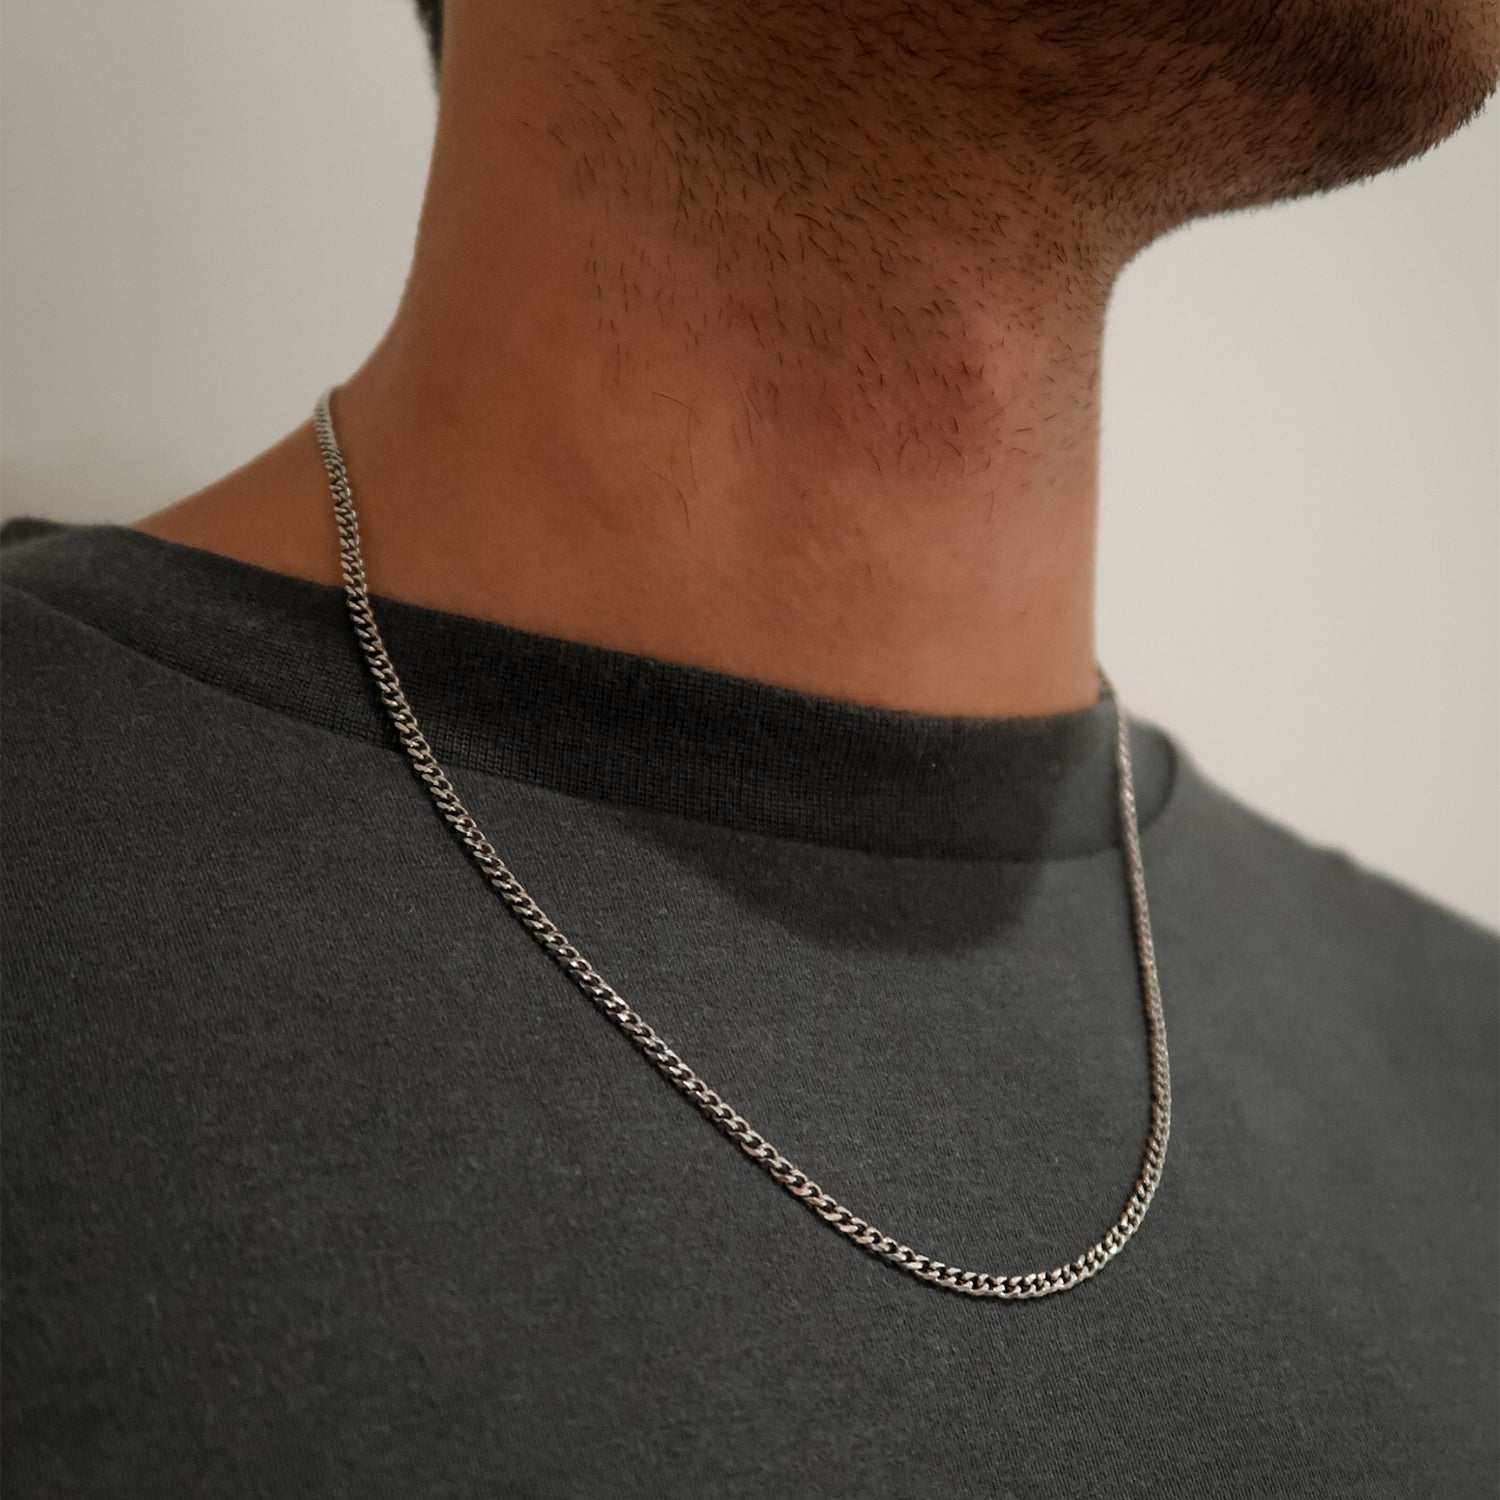 3mm silver cuban link chain on male neck